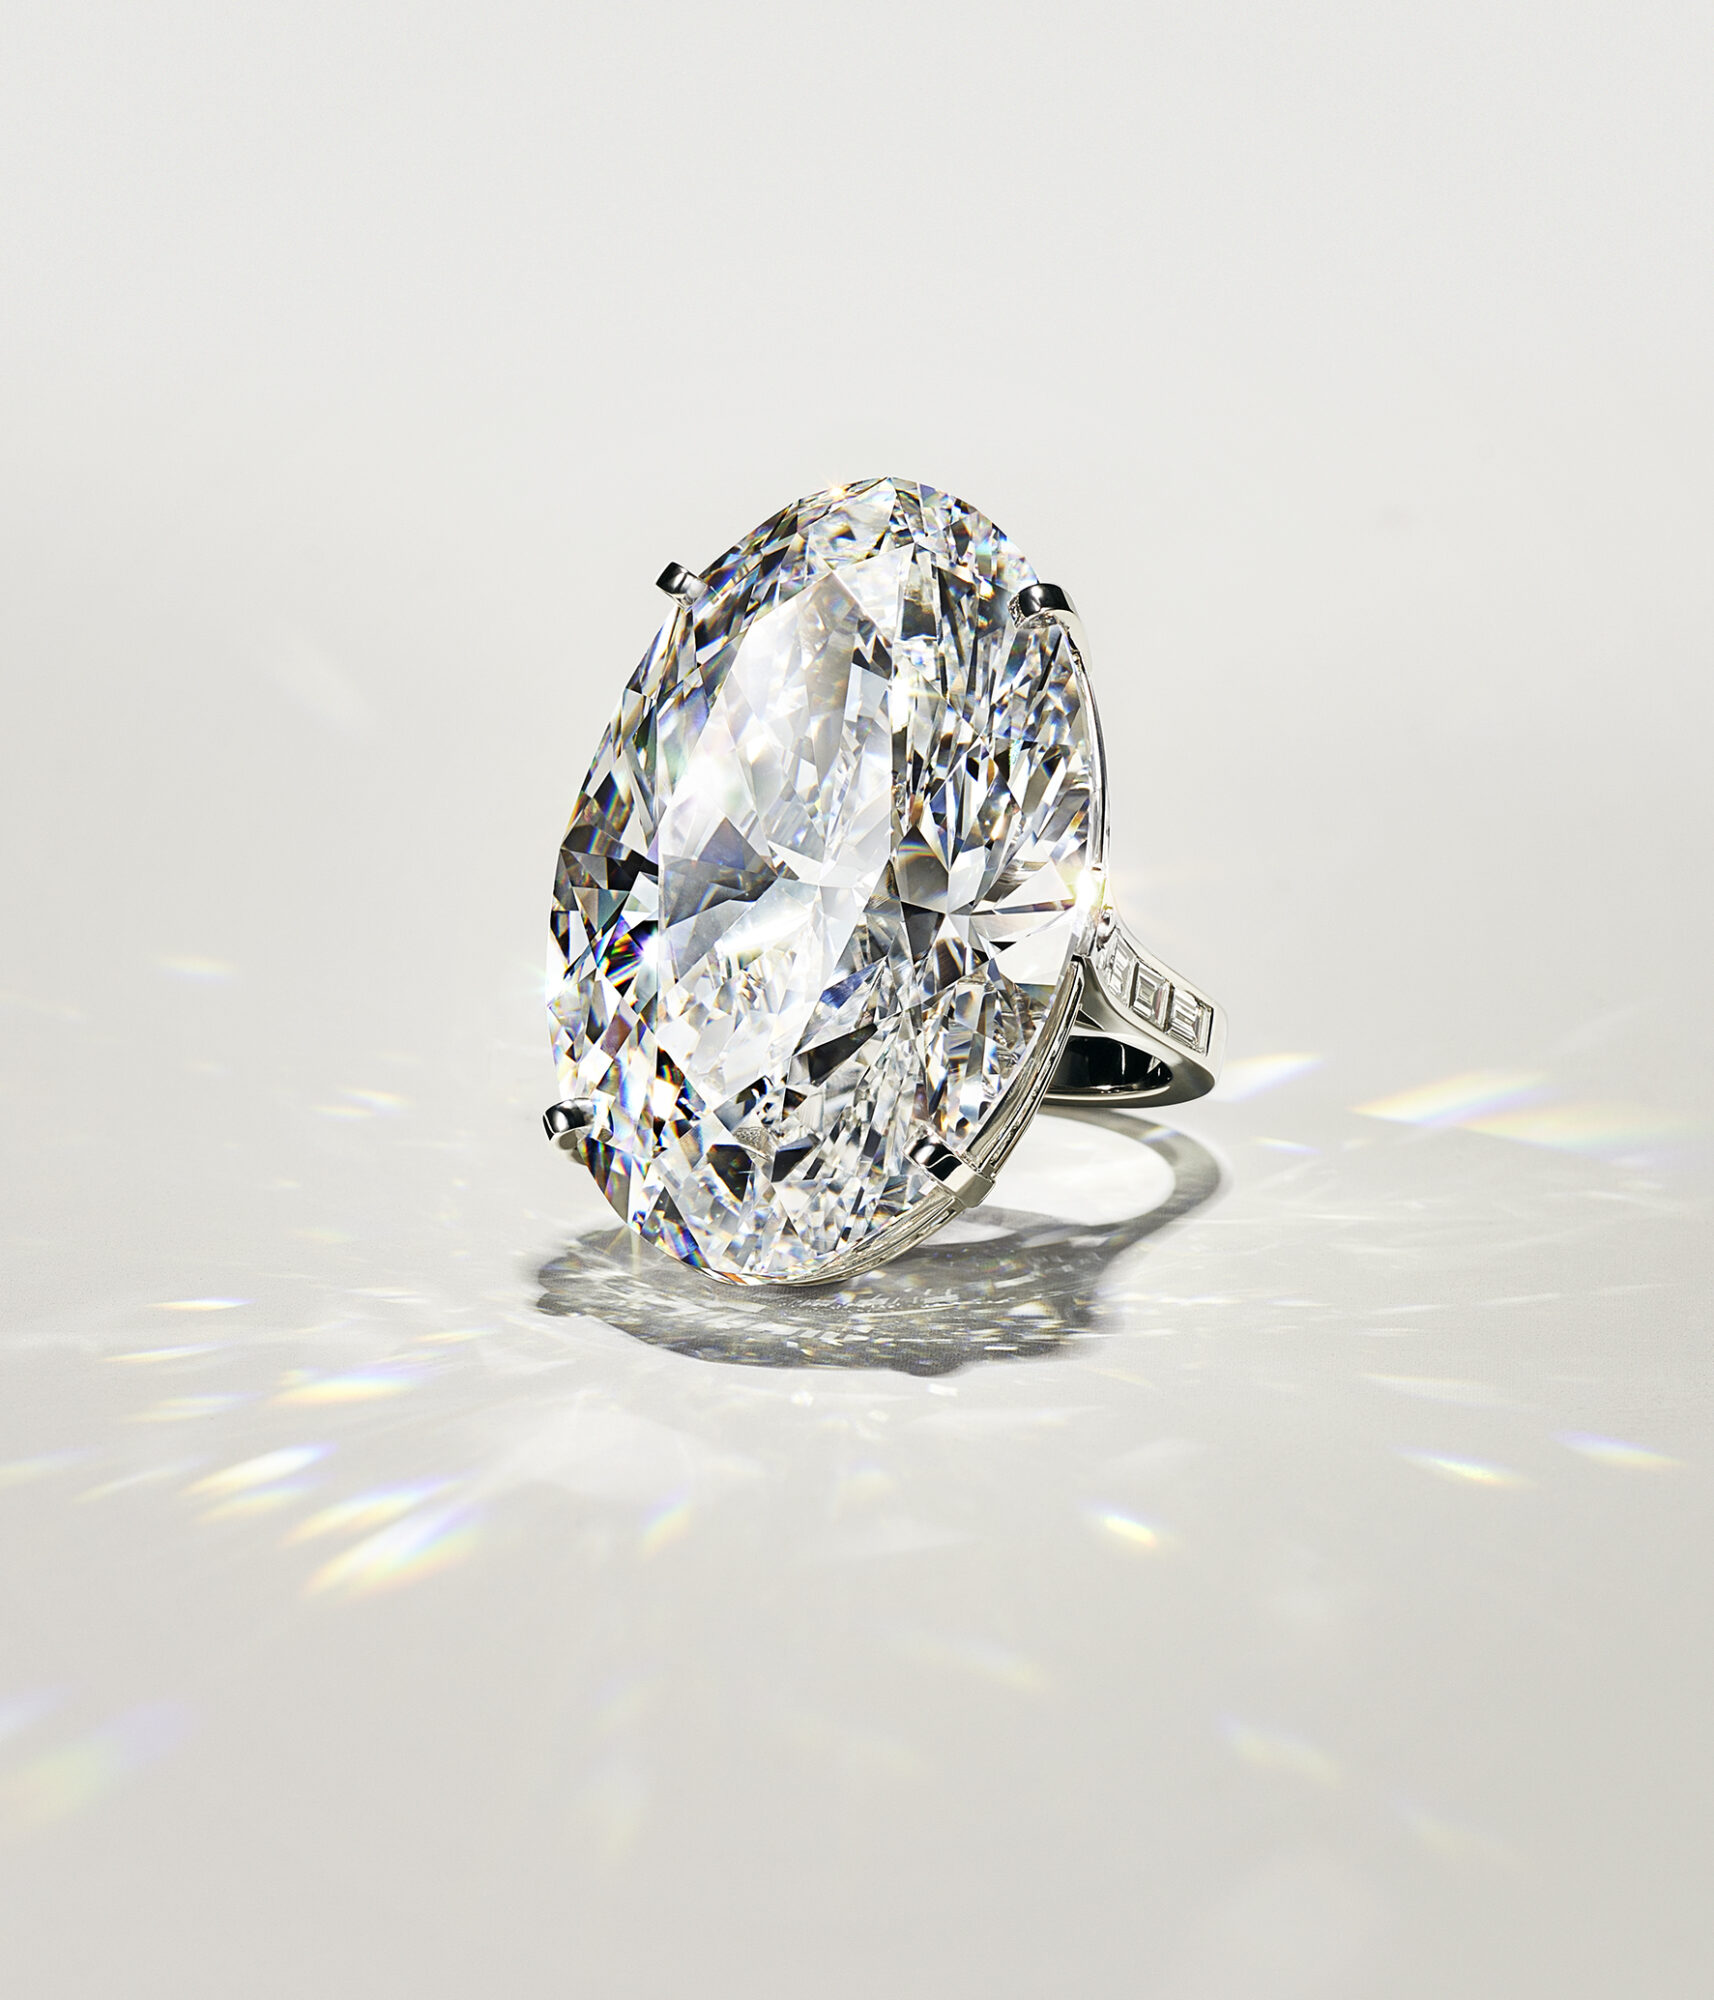 Expensive Diamond Ring stock image. Image of gift, blue - 161566773